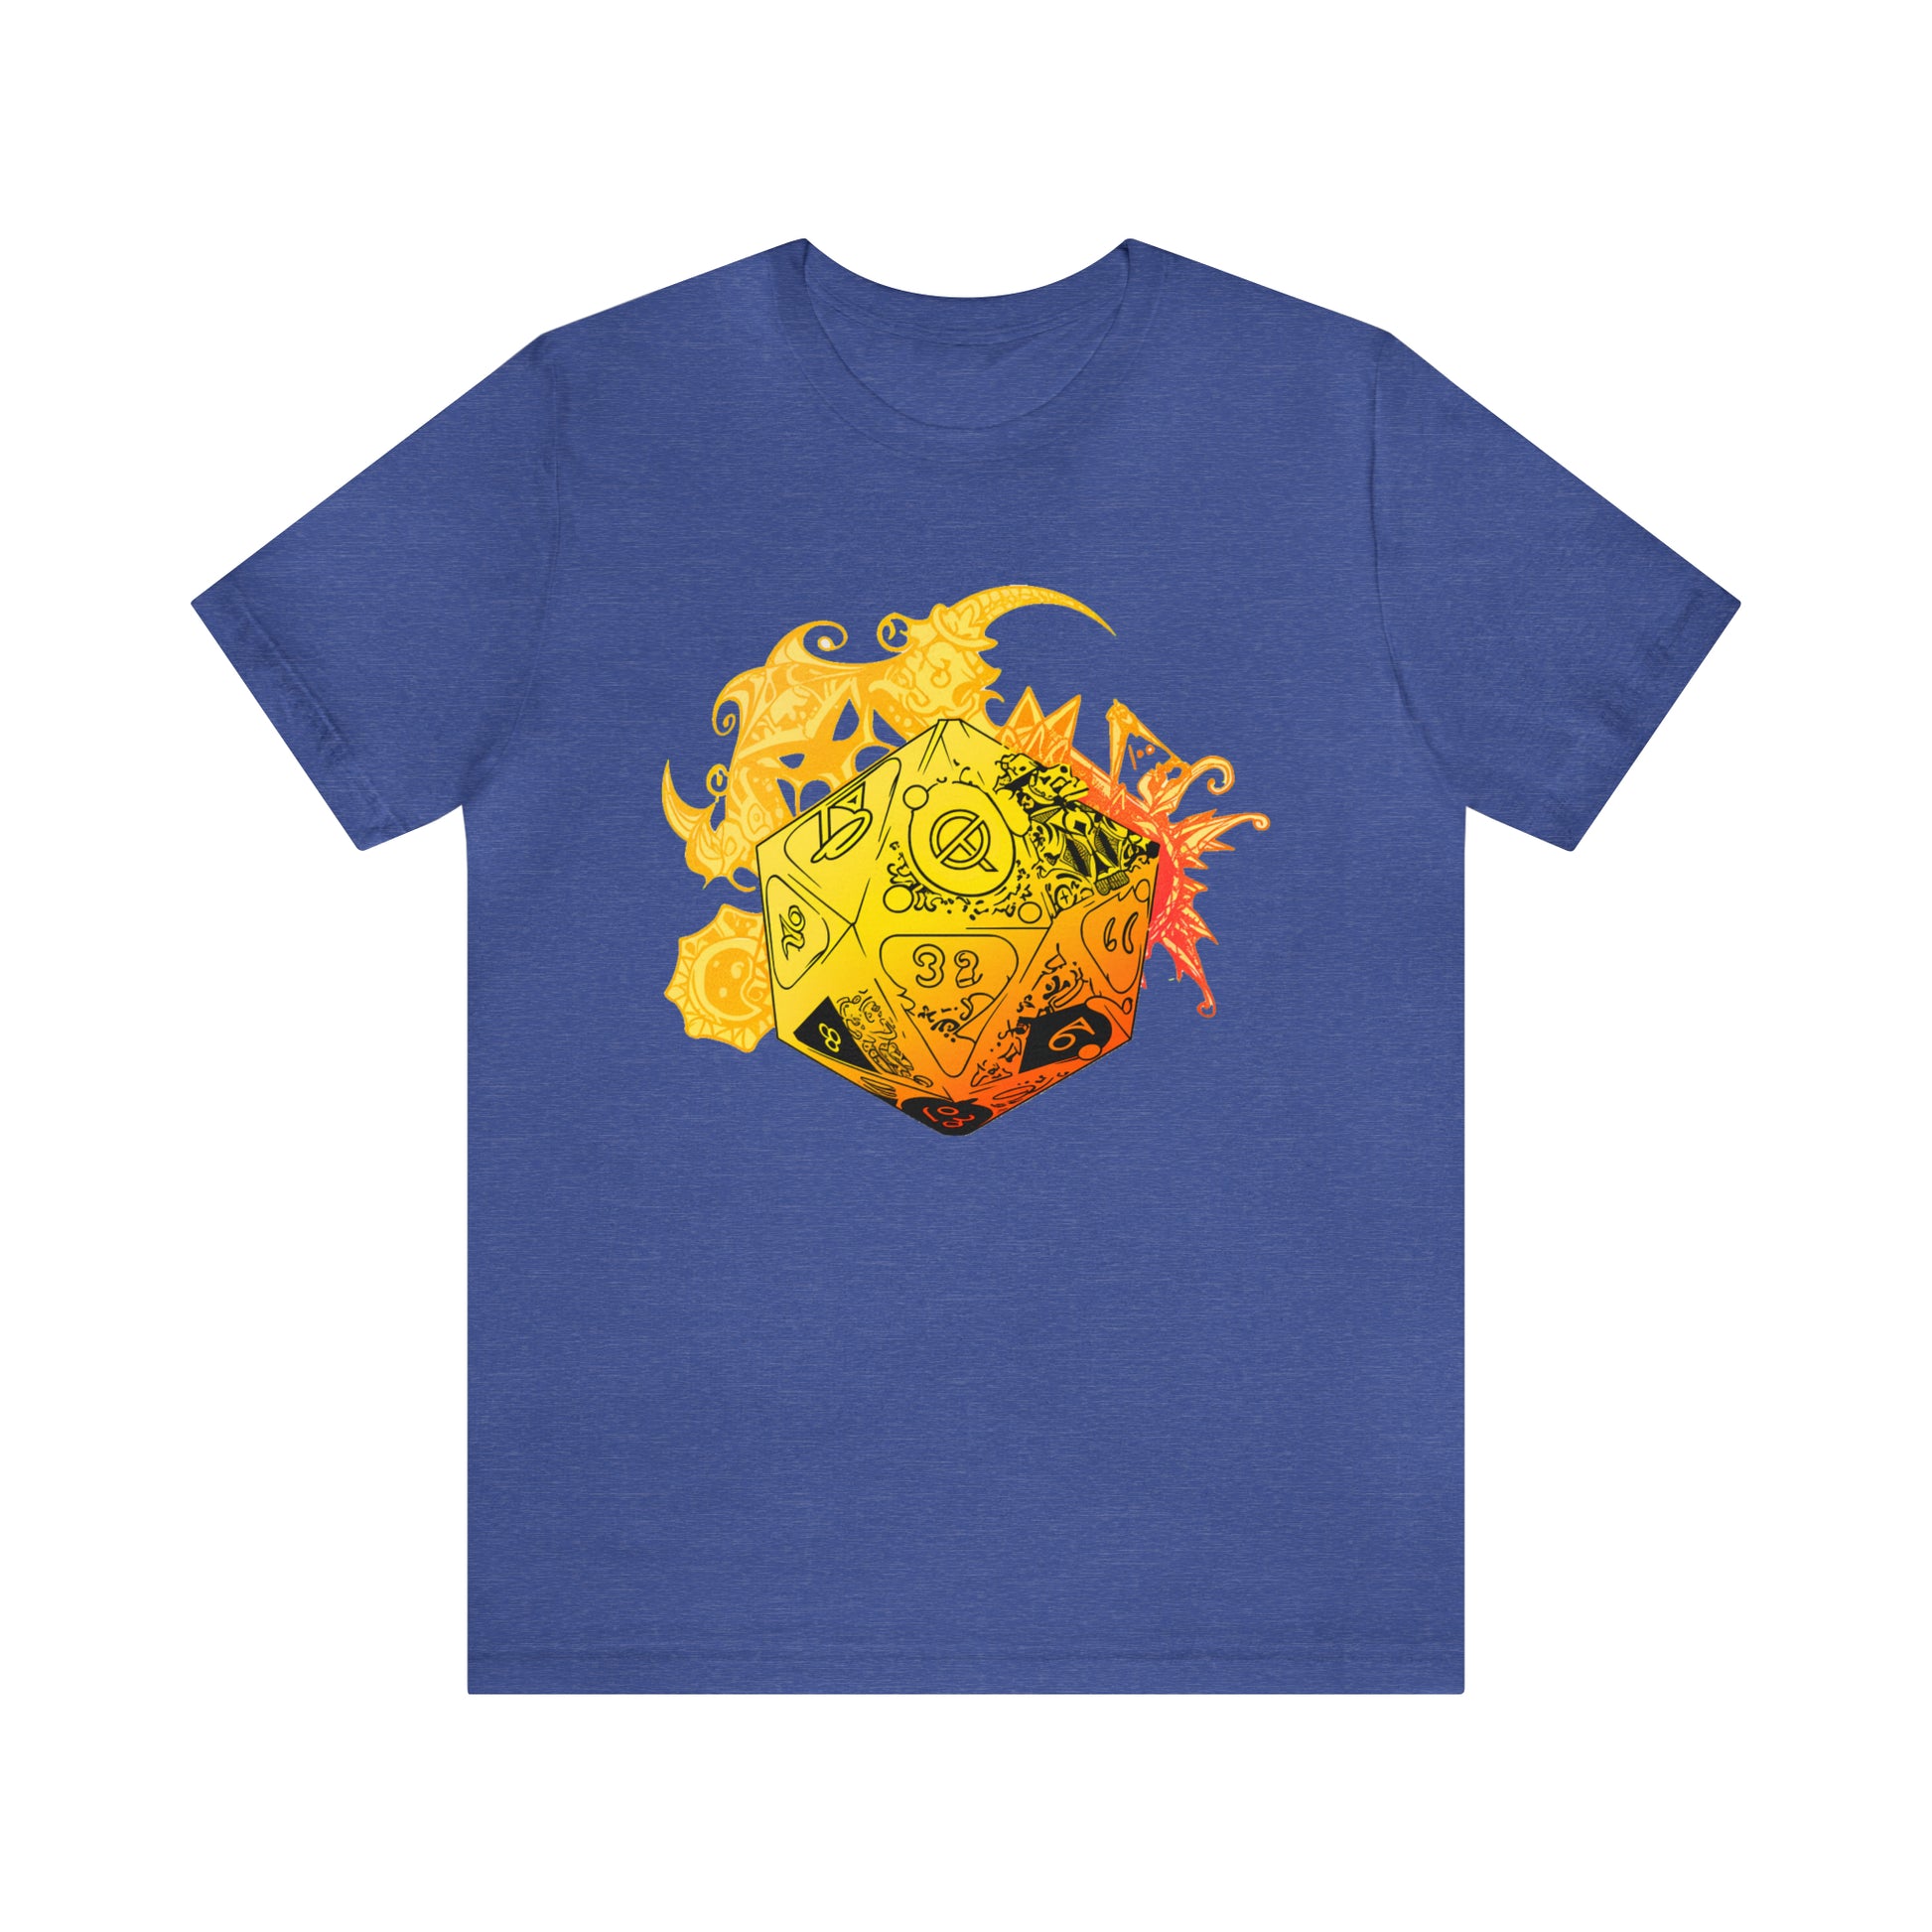 heather-true-royal-quest-thread-tee-shirt-with-large-yellow-dragon-dice-on-center-of-shirt